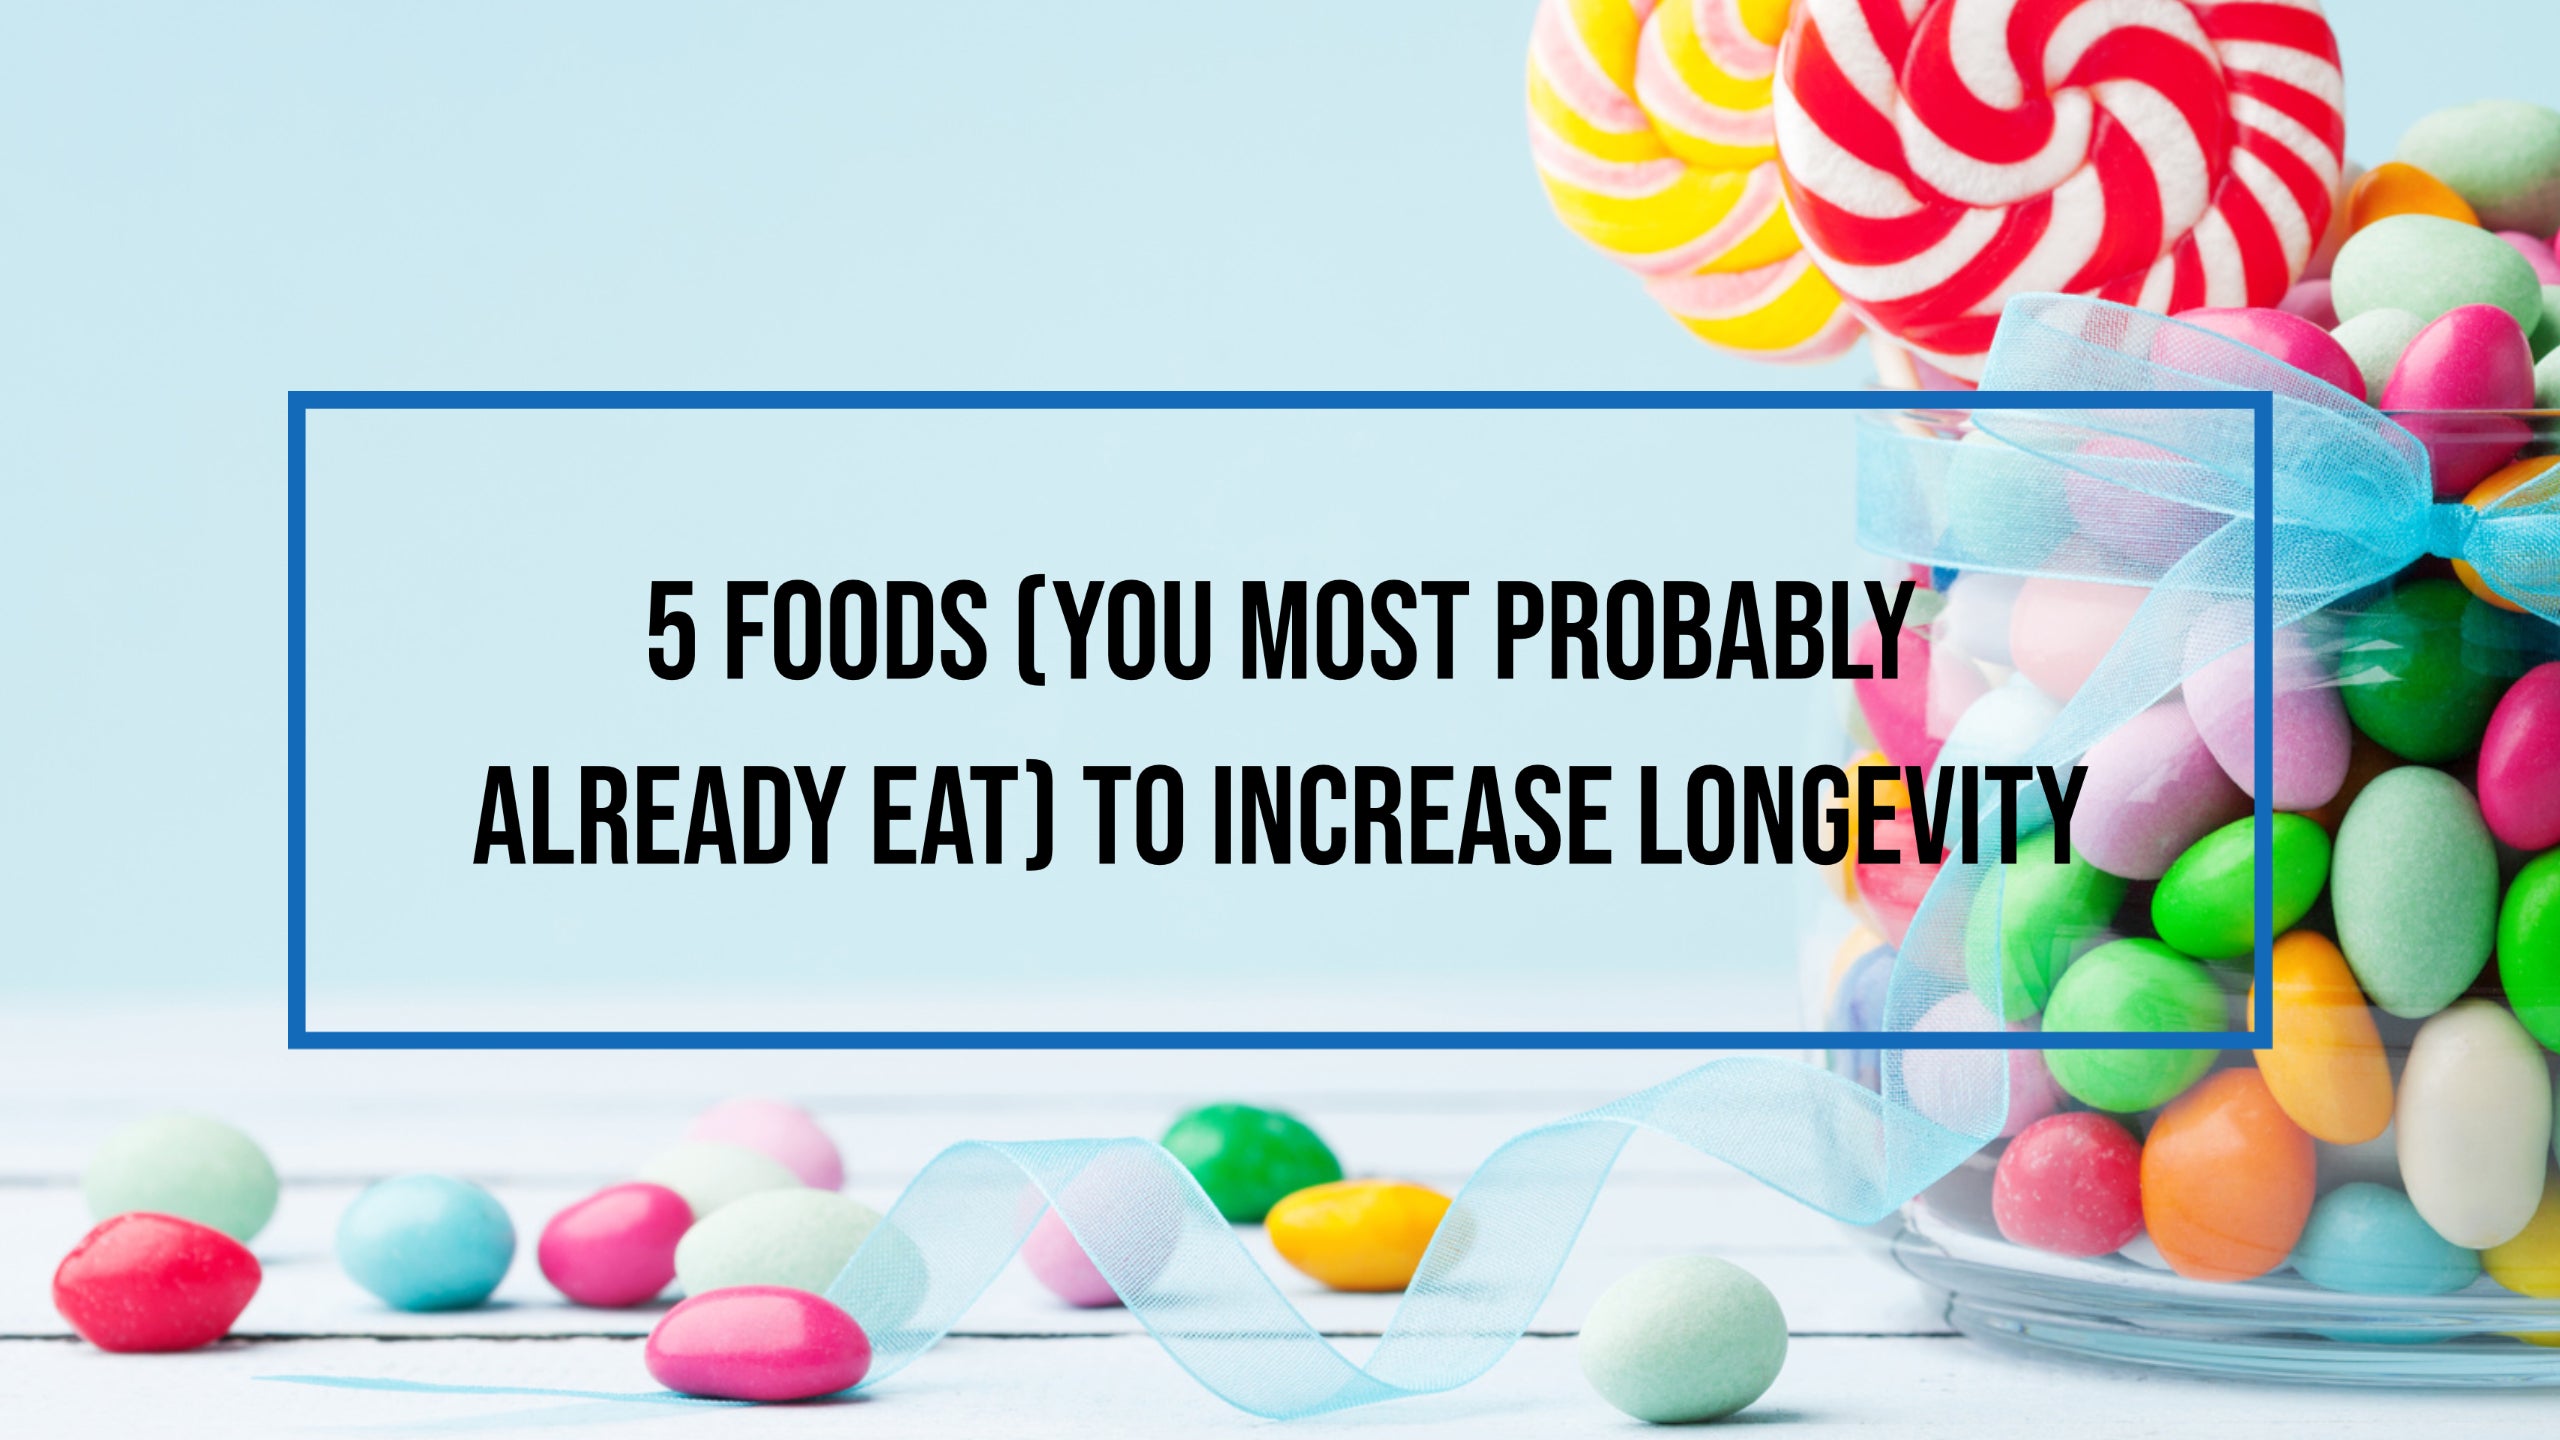 5 Foods (you most probably already eat) to Increase Longevity 